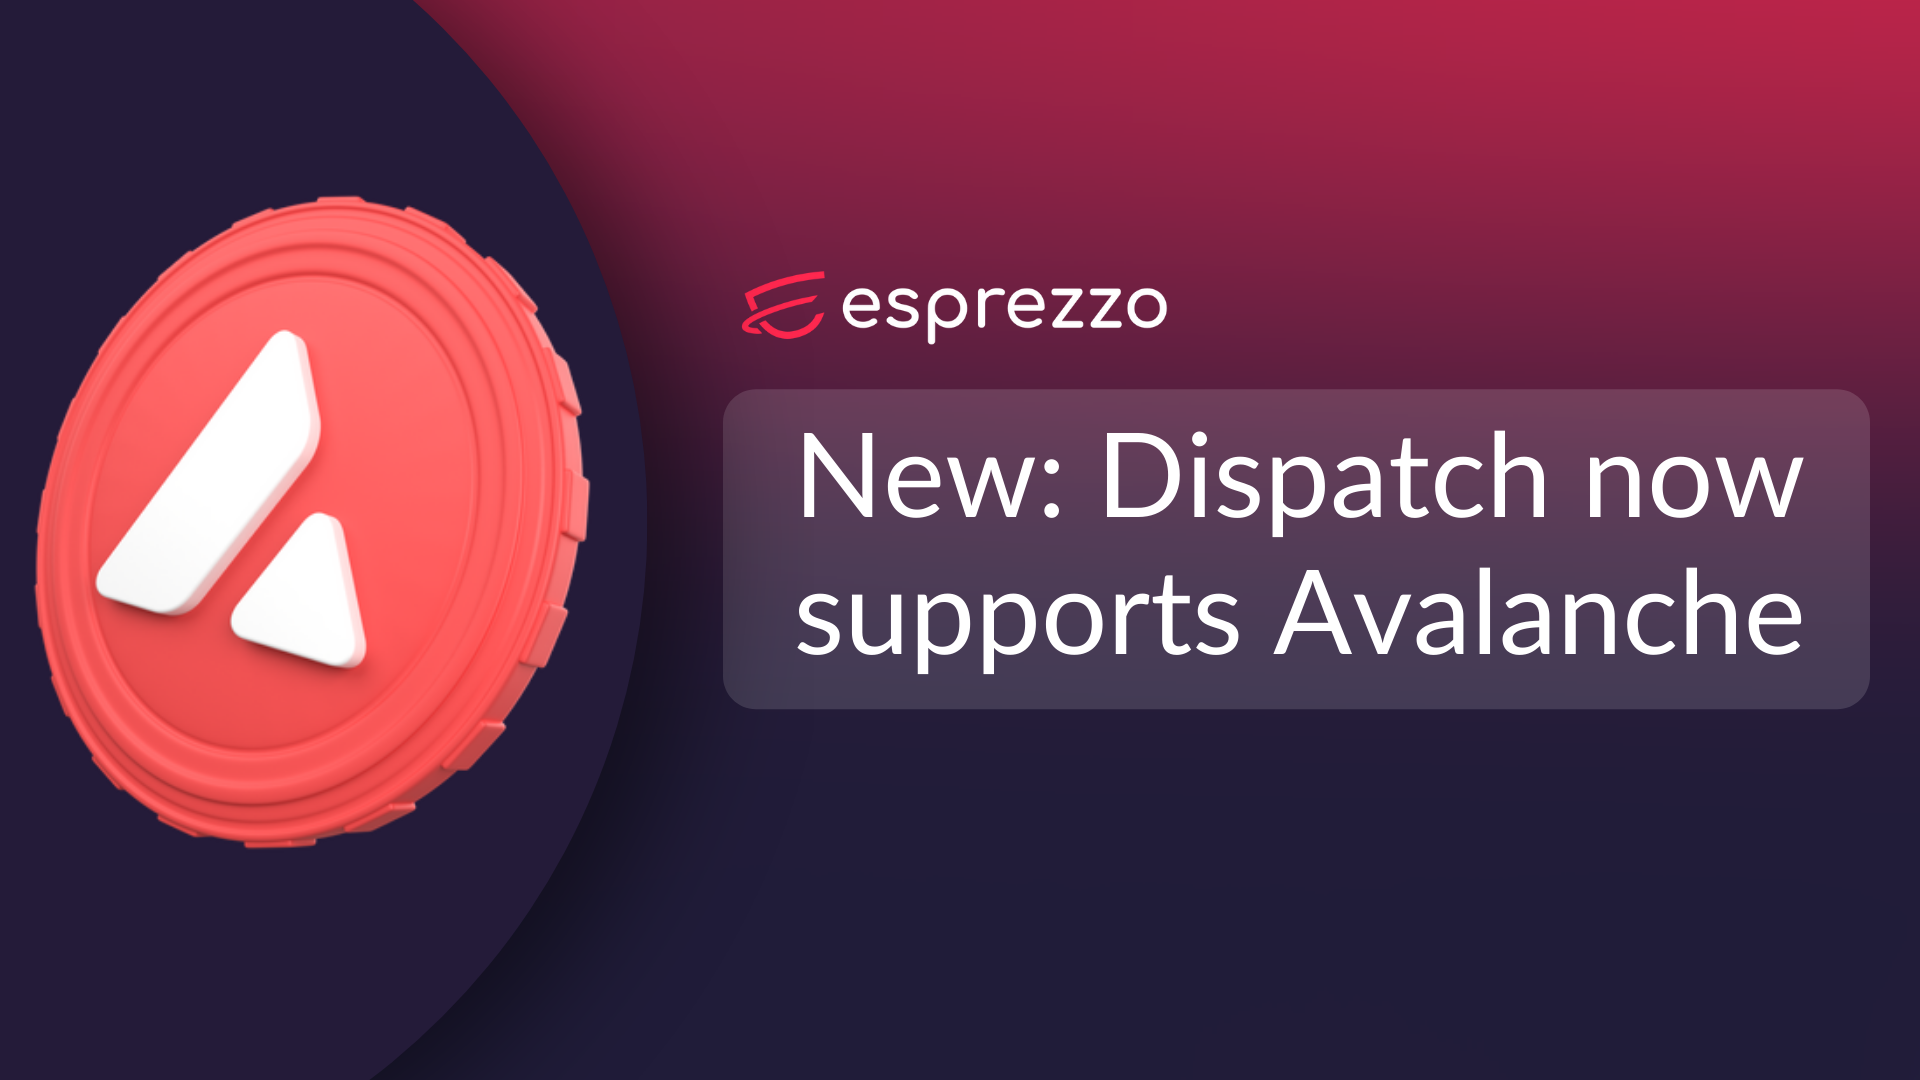 Esprezzo and Avalanche logos with text "New: Dispatch now supports Avalanche